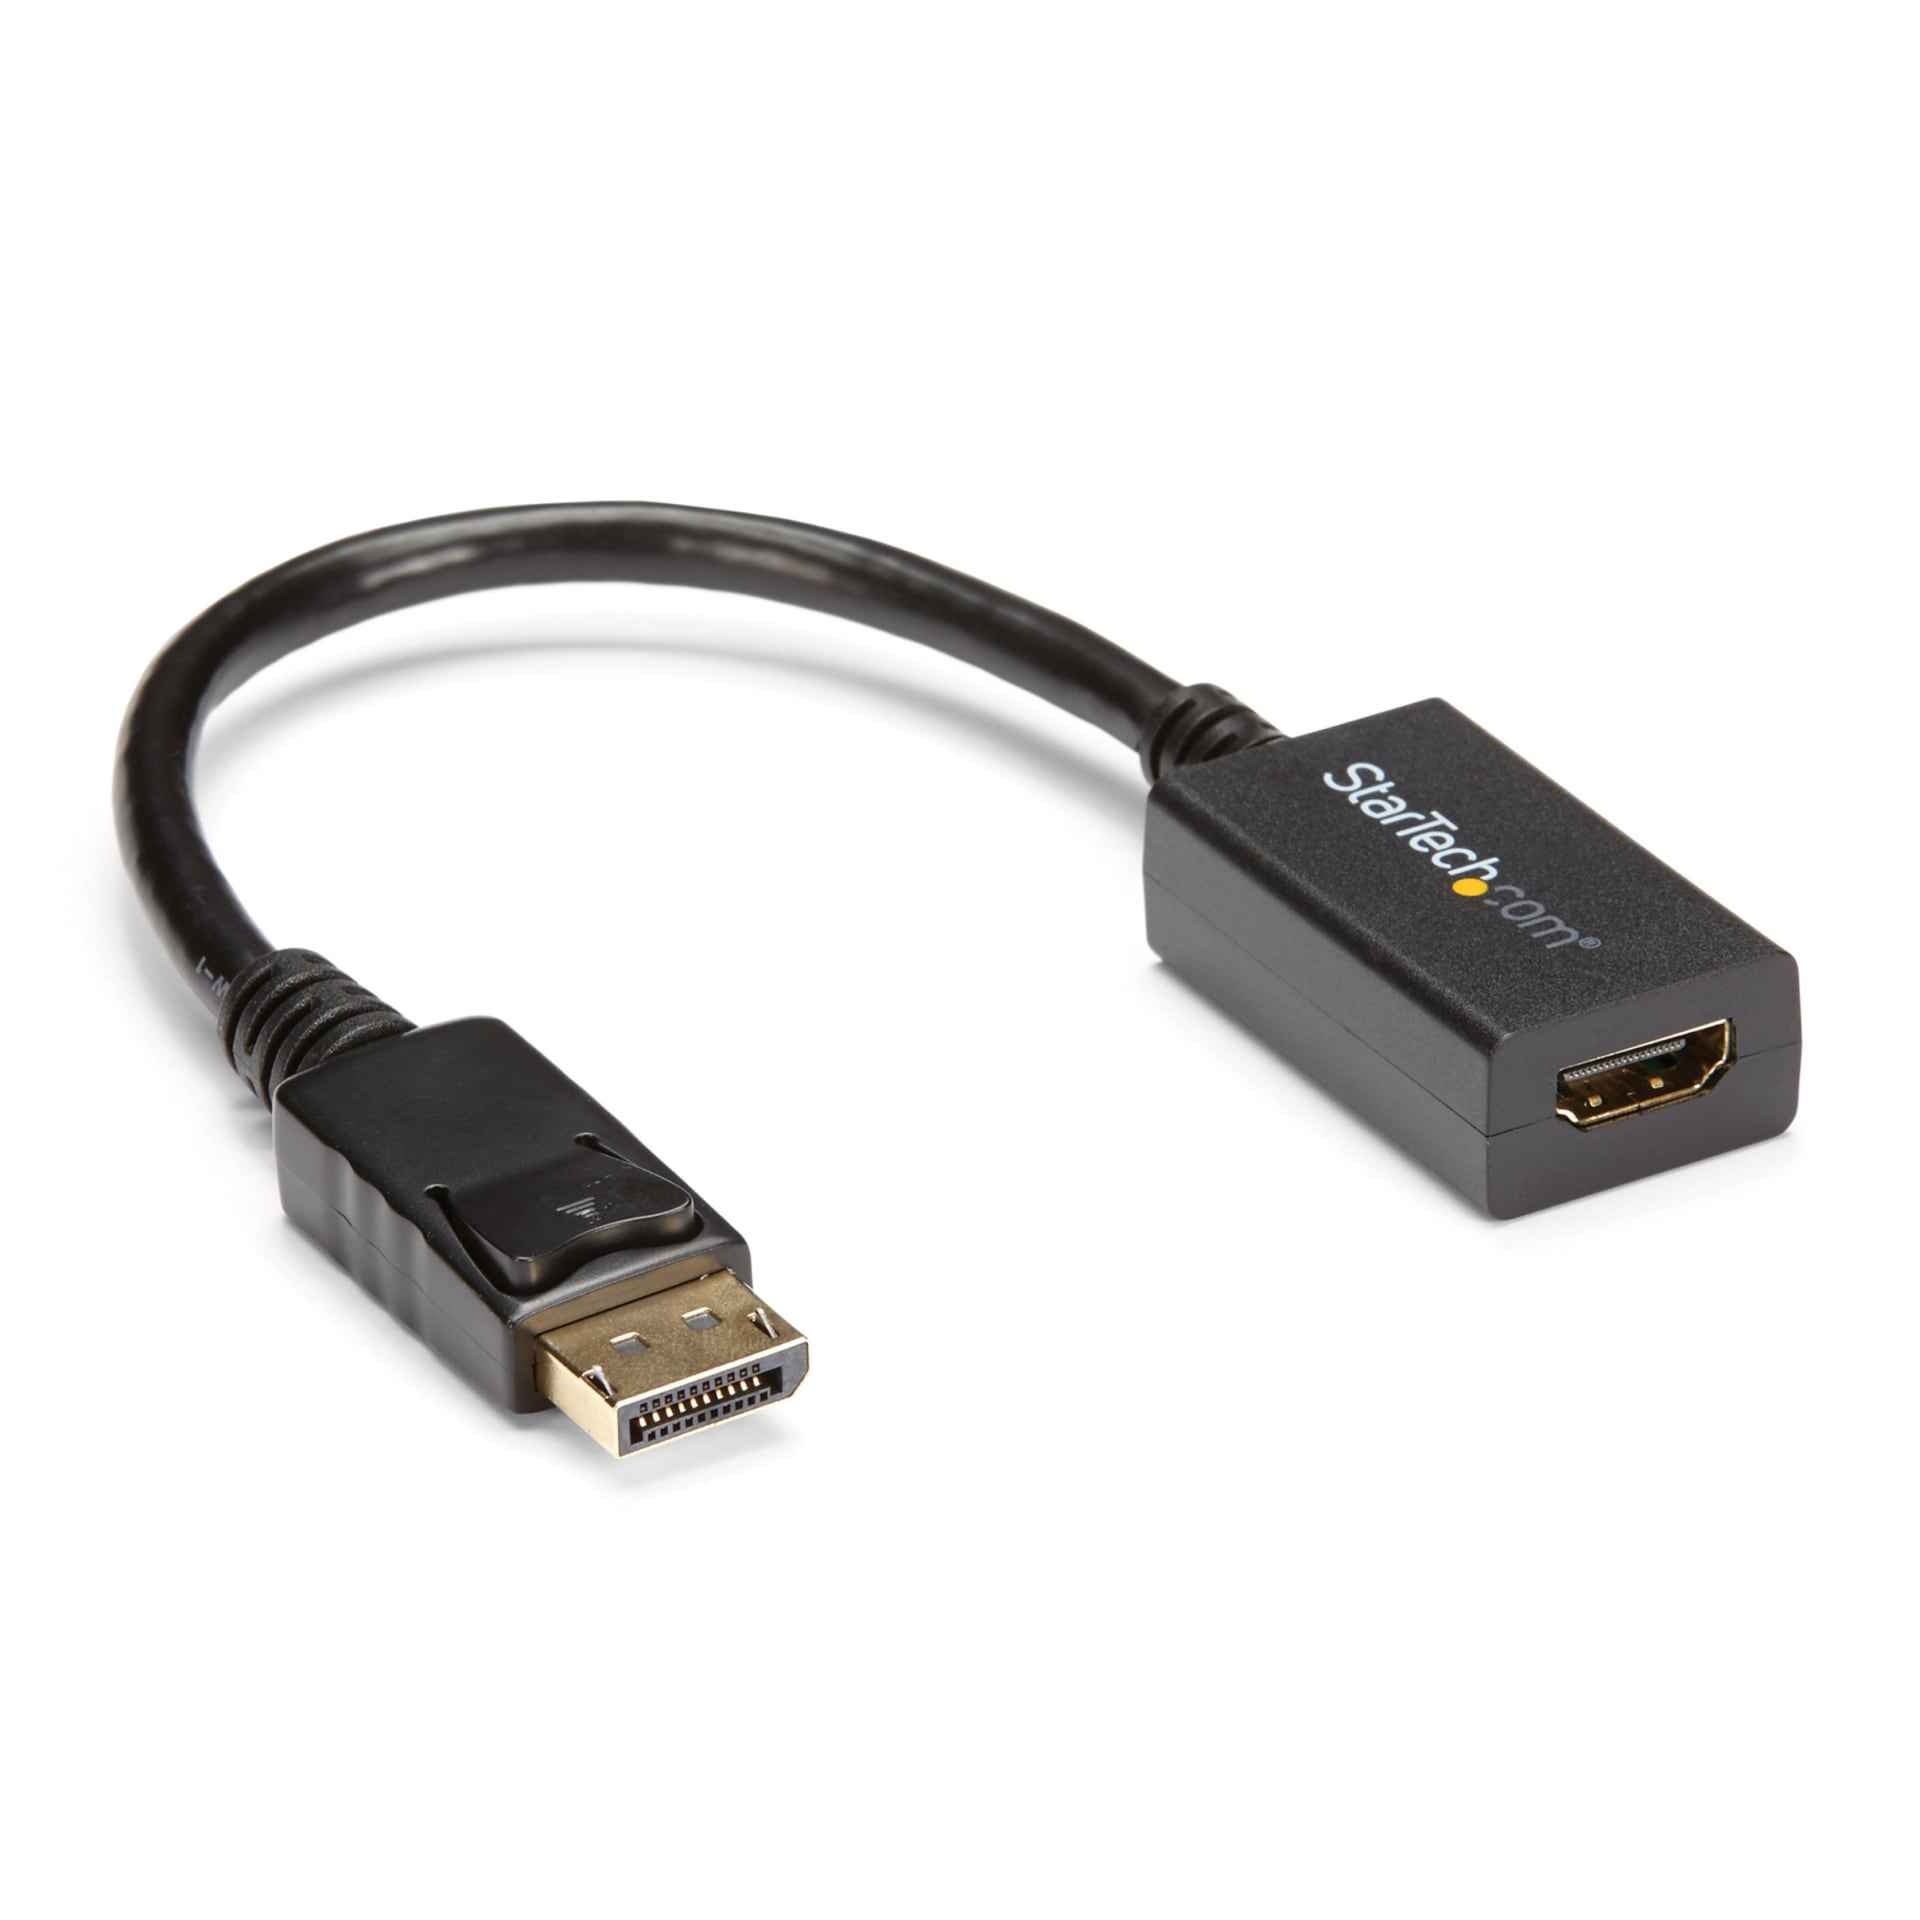 Burger attribut Skælde ud StarTech.com DisplayPort to HDMI Adapter - 1080p DP to HDMI Converter -  Passive Video Adapter Dongle - DP2HDMI2 - Monitor Cables & Adapters -  CDW.com